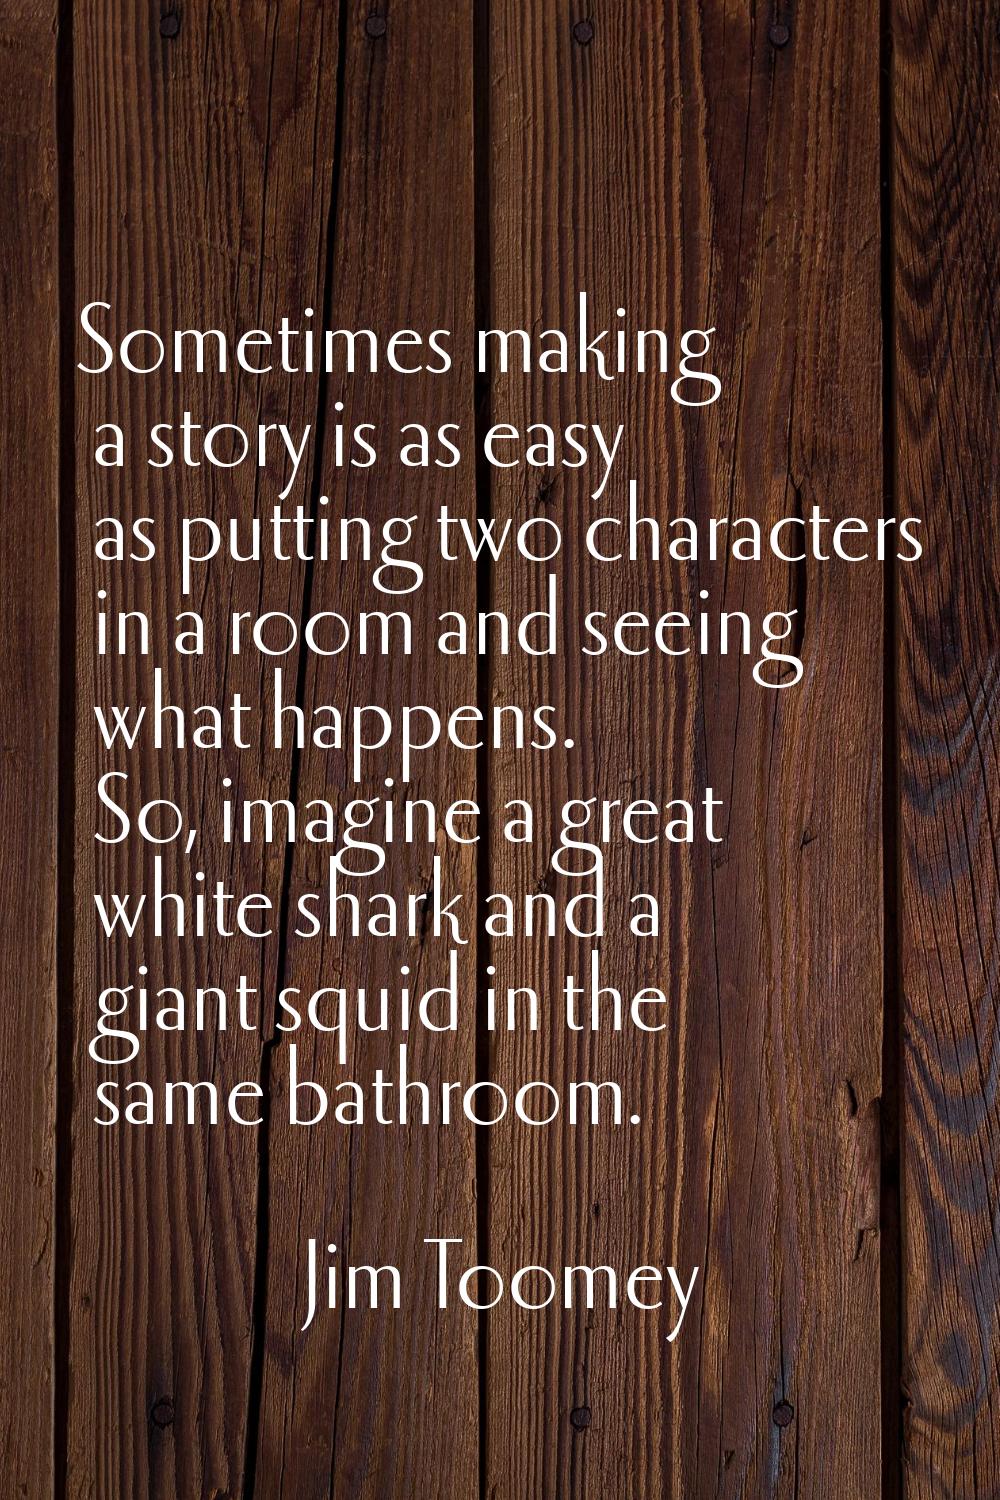 Sometimes making a story is as easy as putting two characters in a room and seeing what happens. So